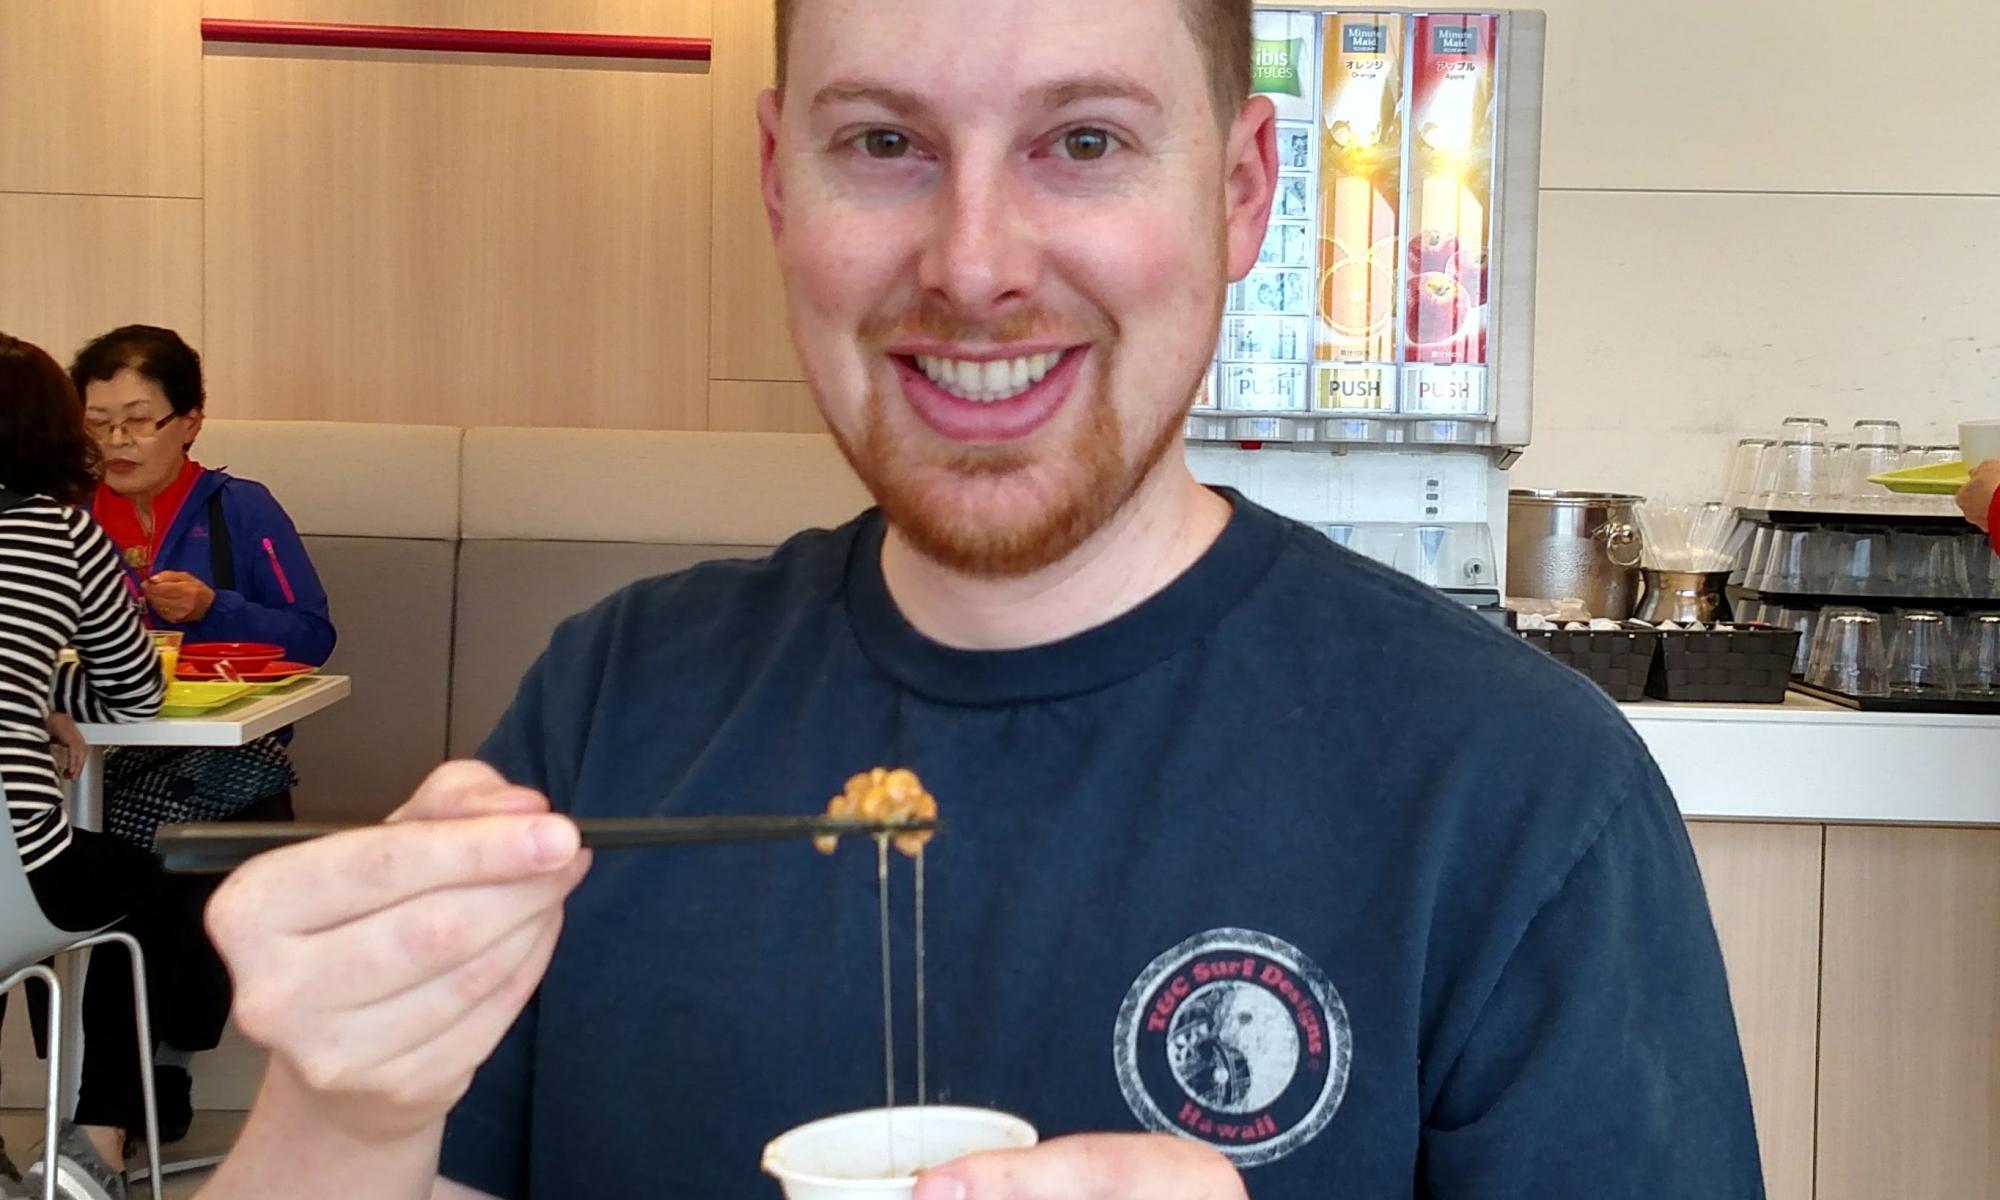 Matt is smiling with a small cup of natto in his left hand and chopsticks in his right hand. The soybean mush is gripped by the chopsticks with a trail of goo leading back into the cup. He is smiling despite the fact that he is about to eat something gross.